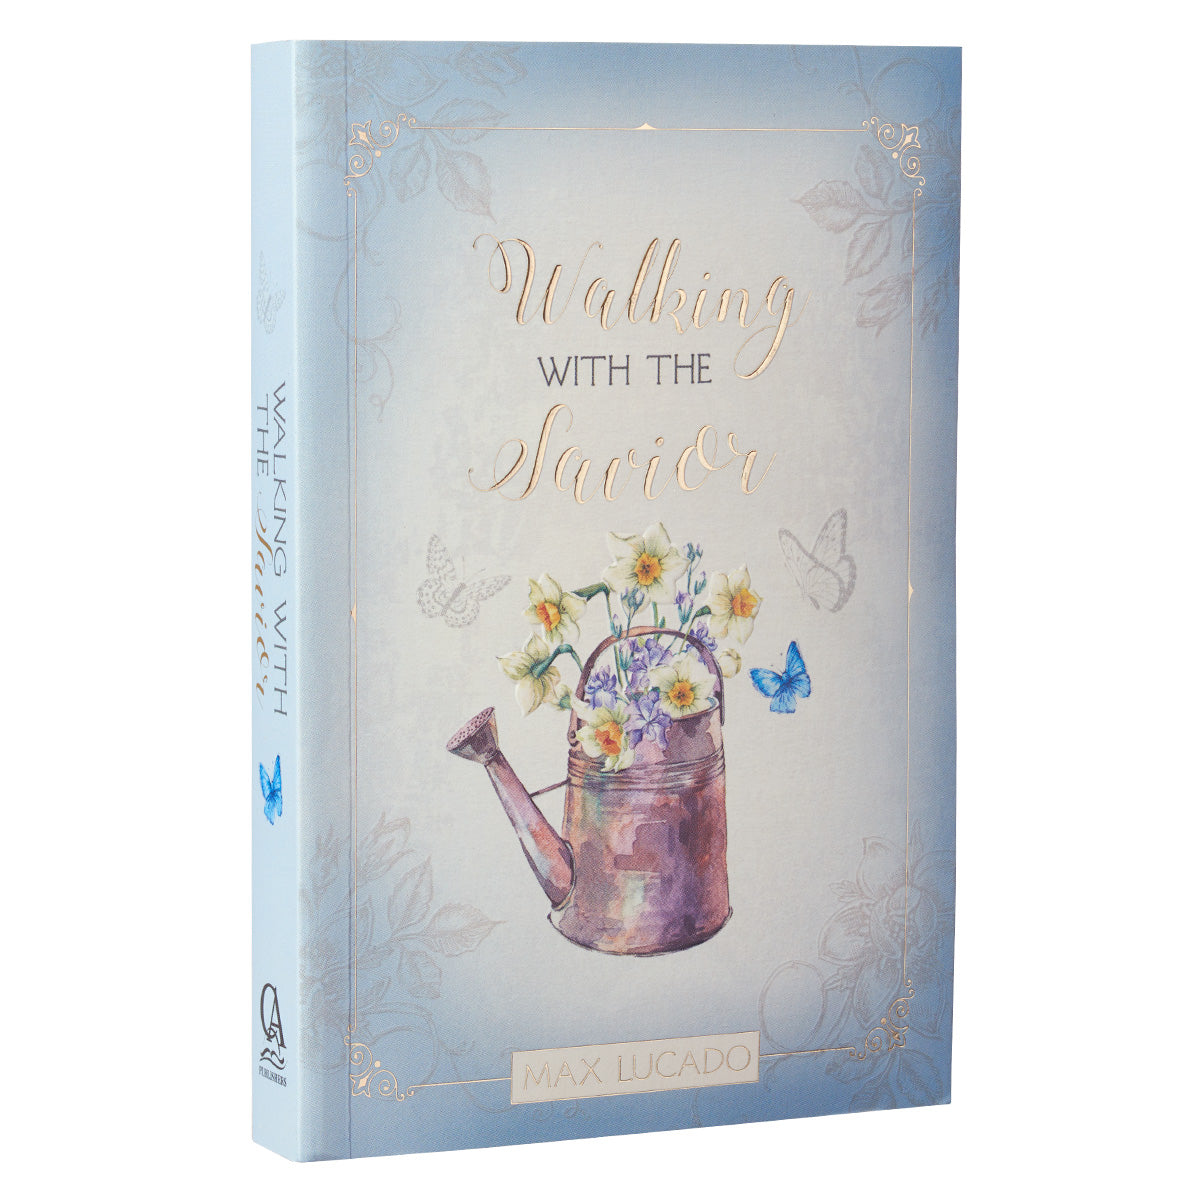 Walking with the Savior Devotional - The Christian Gift Company